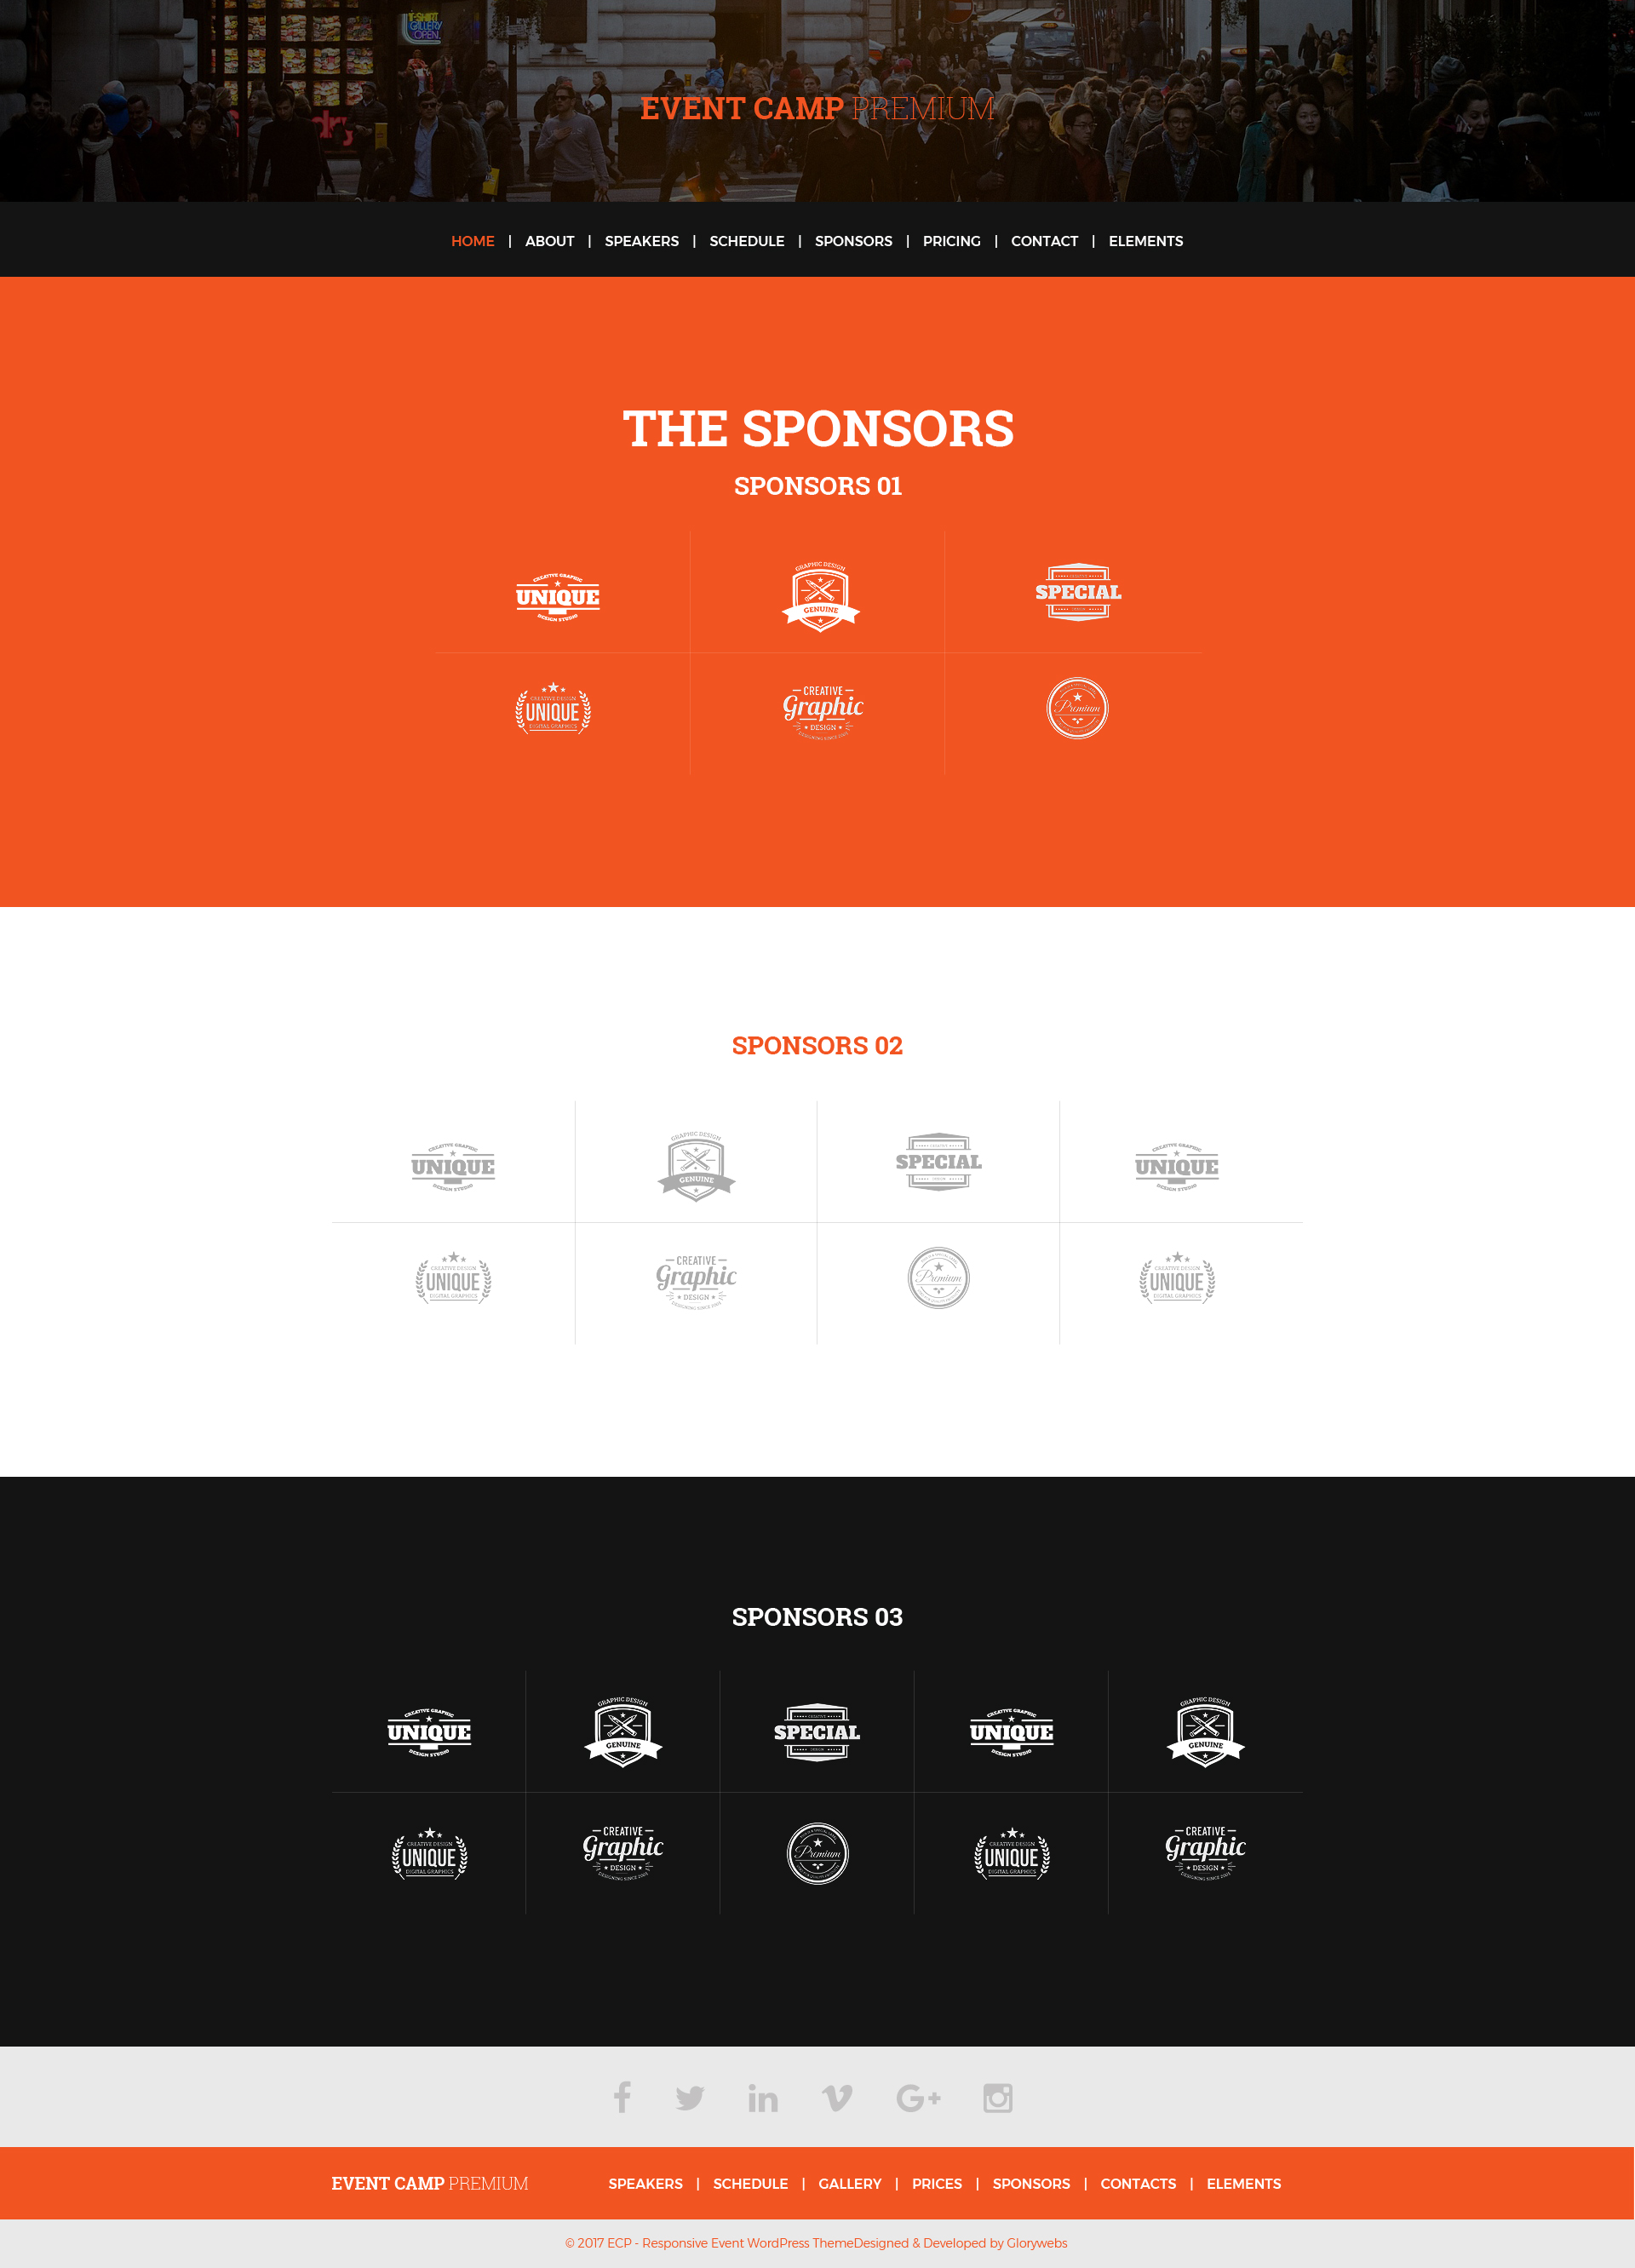 Event Camp - Premium Event Conference PSD Template